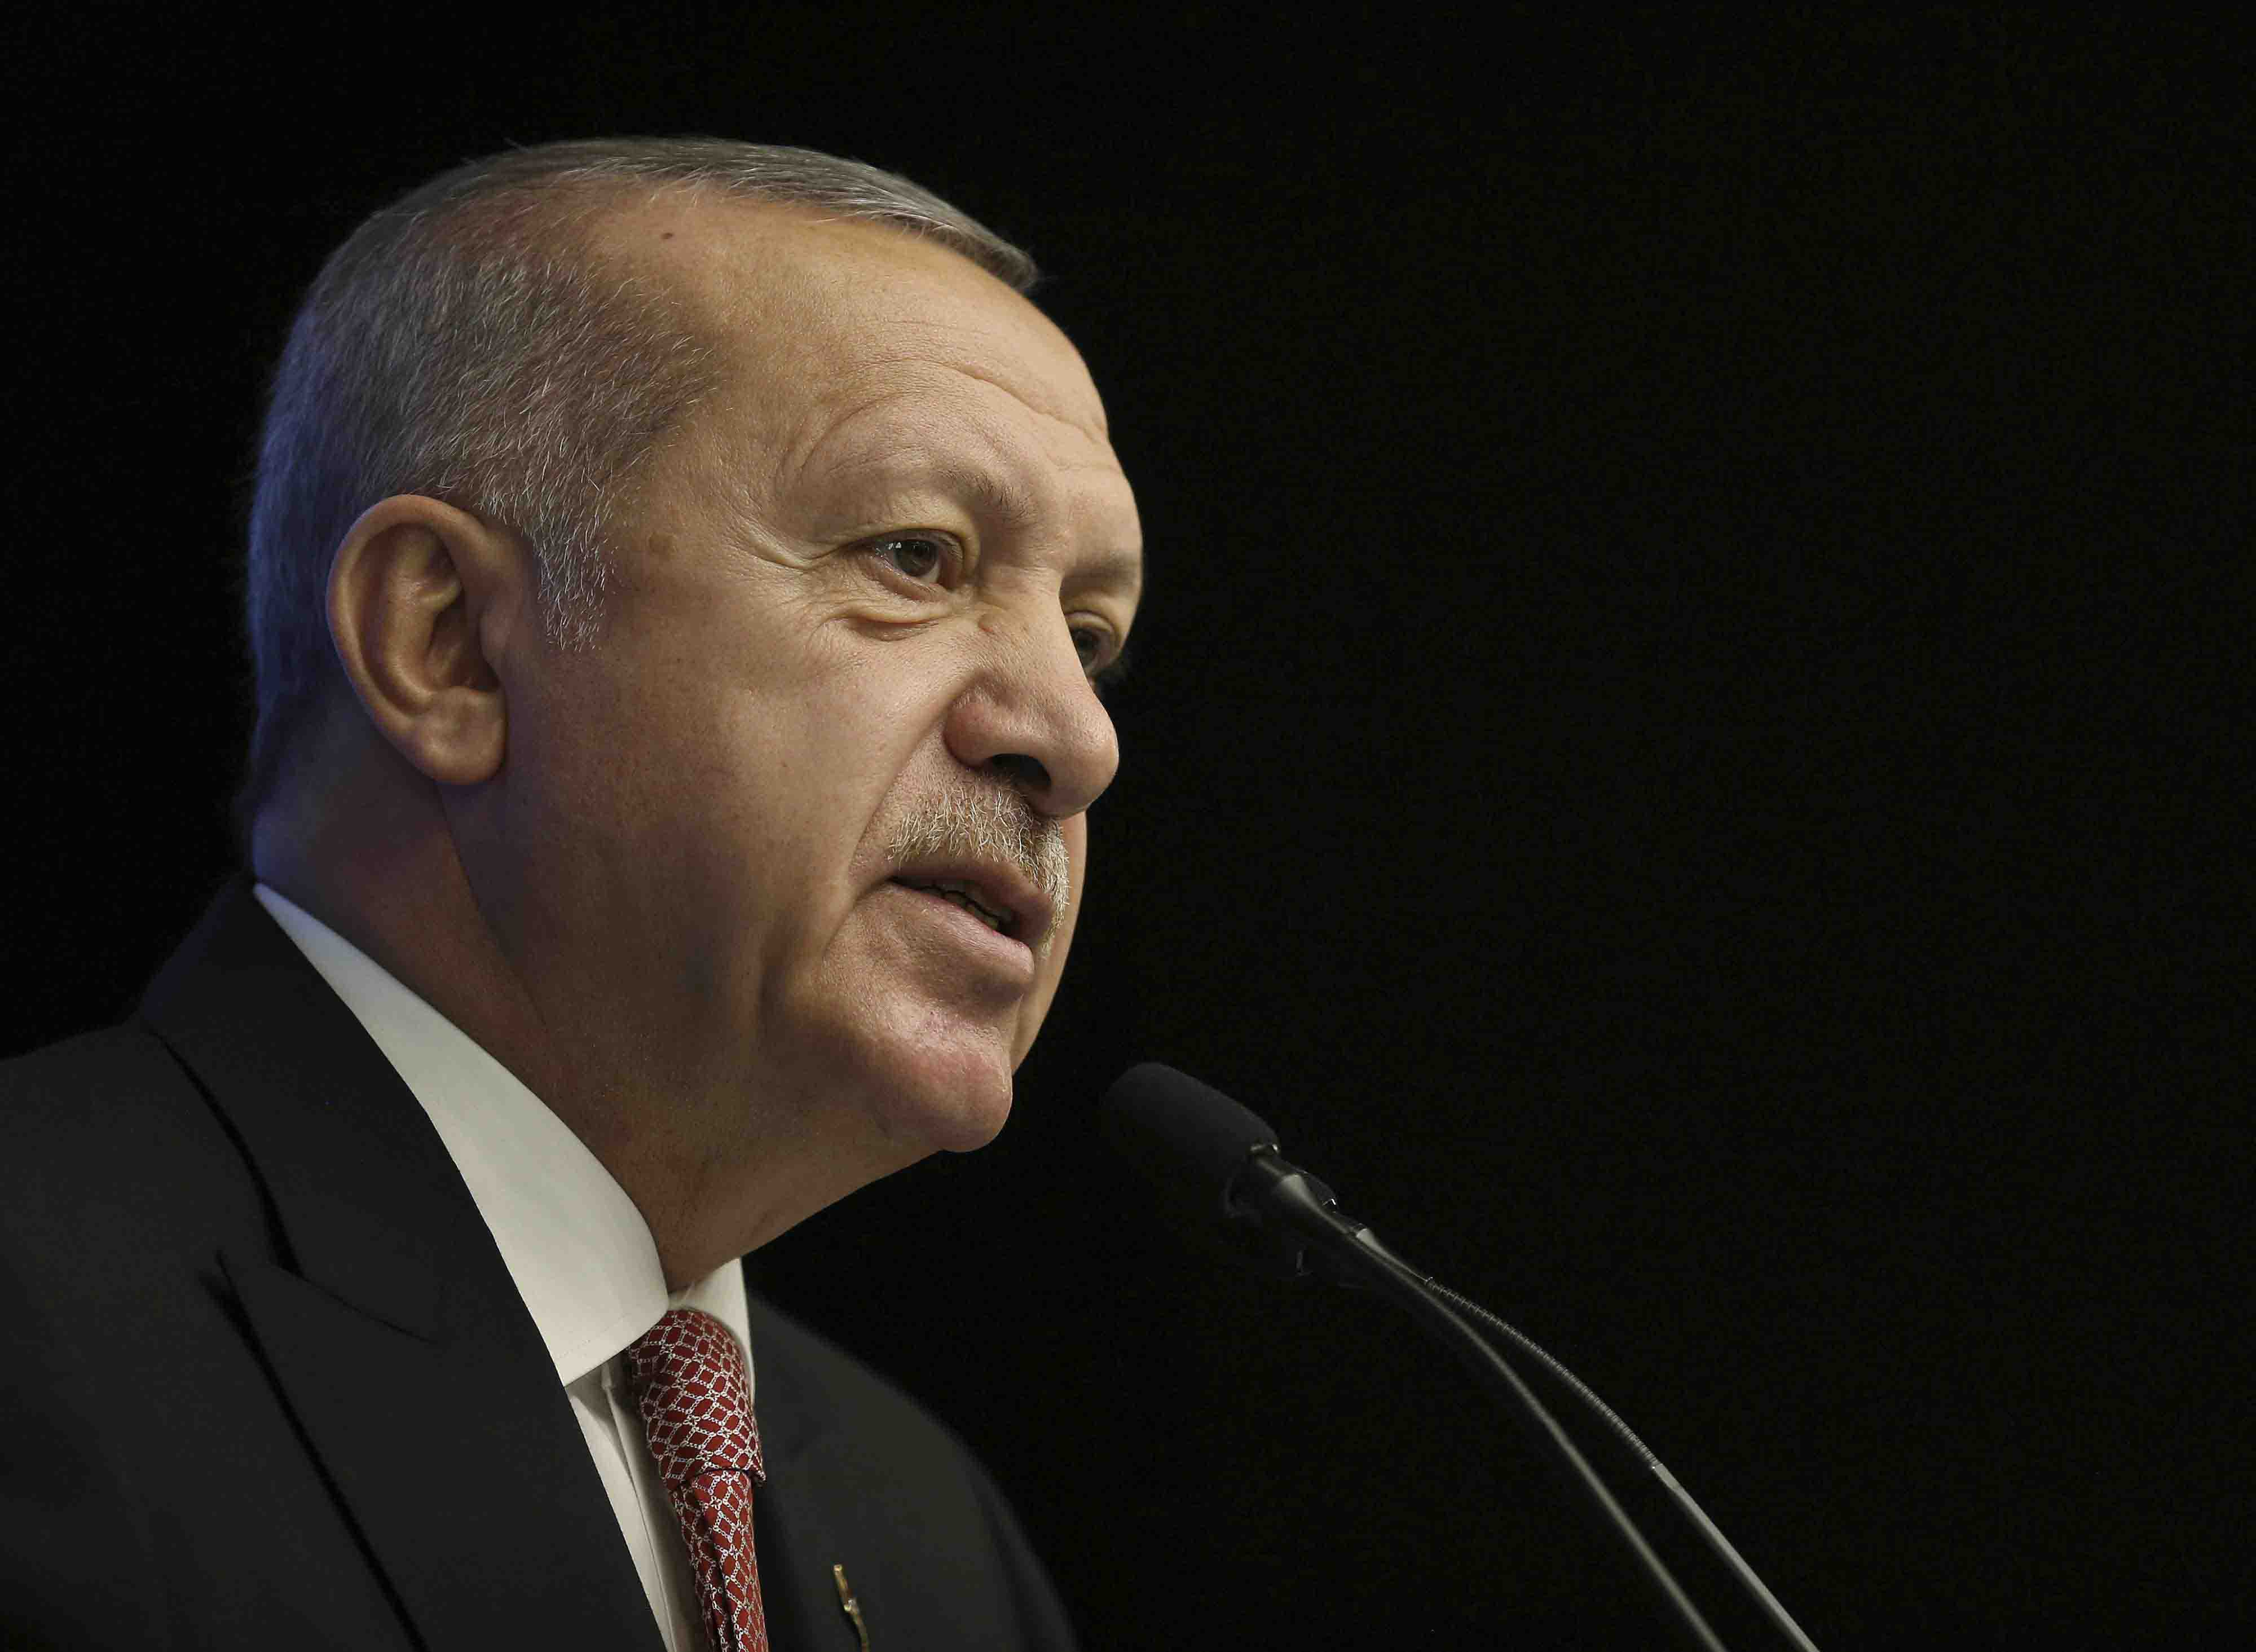 "Unfortunately, some quarters in the West, using all their media tools, are trying to say our economy has collapsed," Erdogan told a business forum